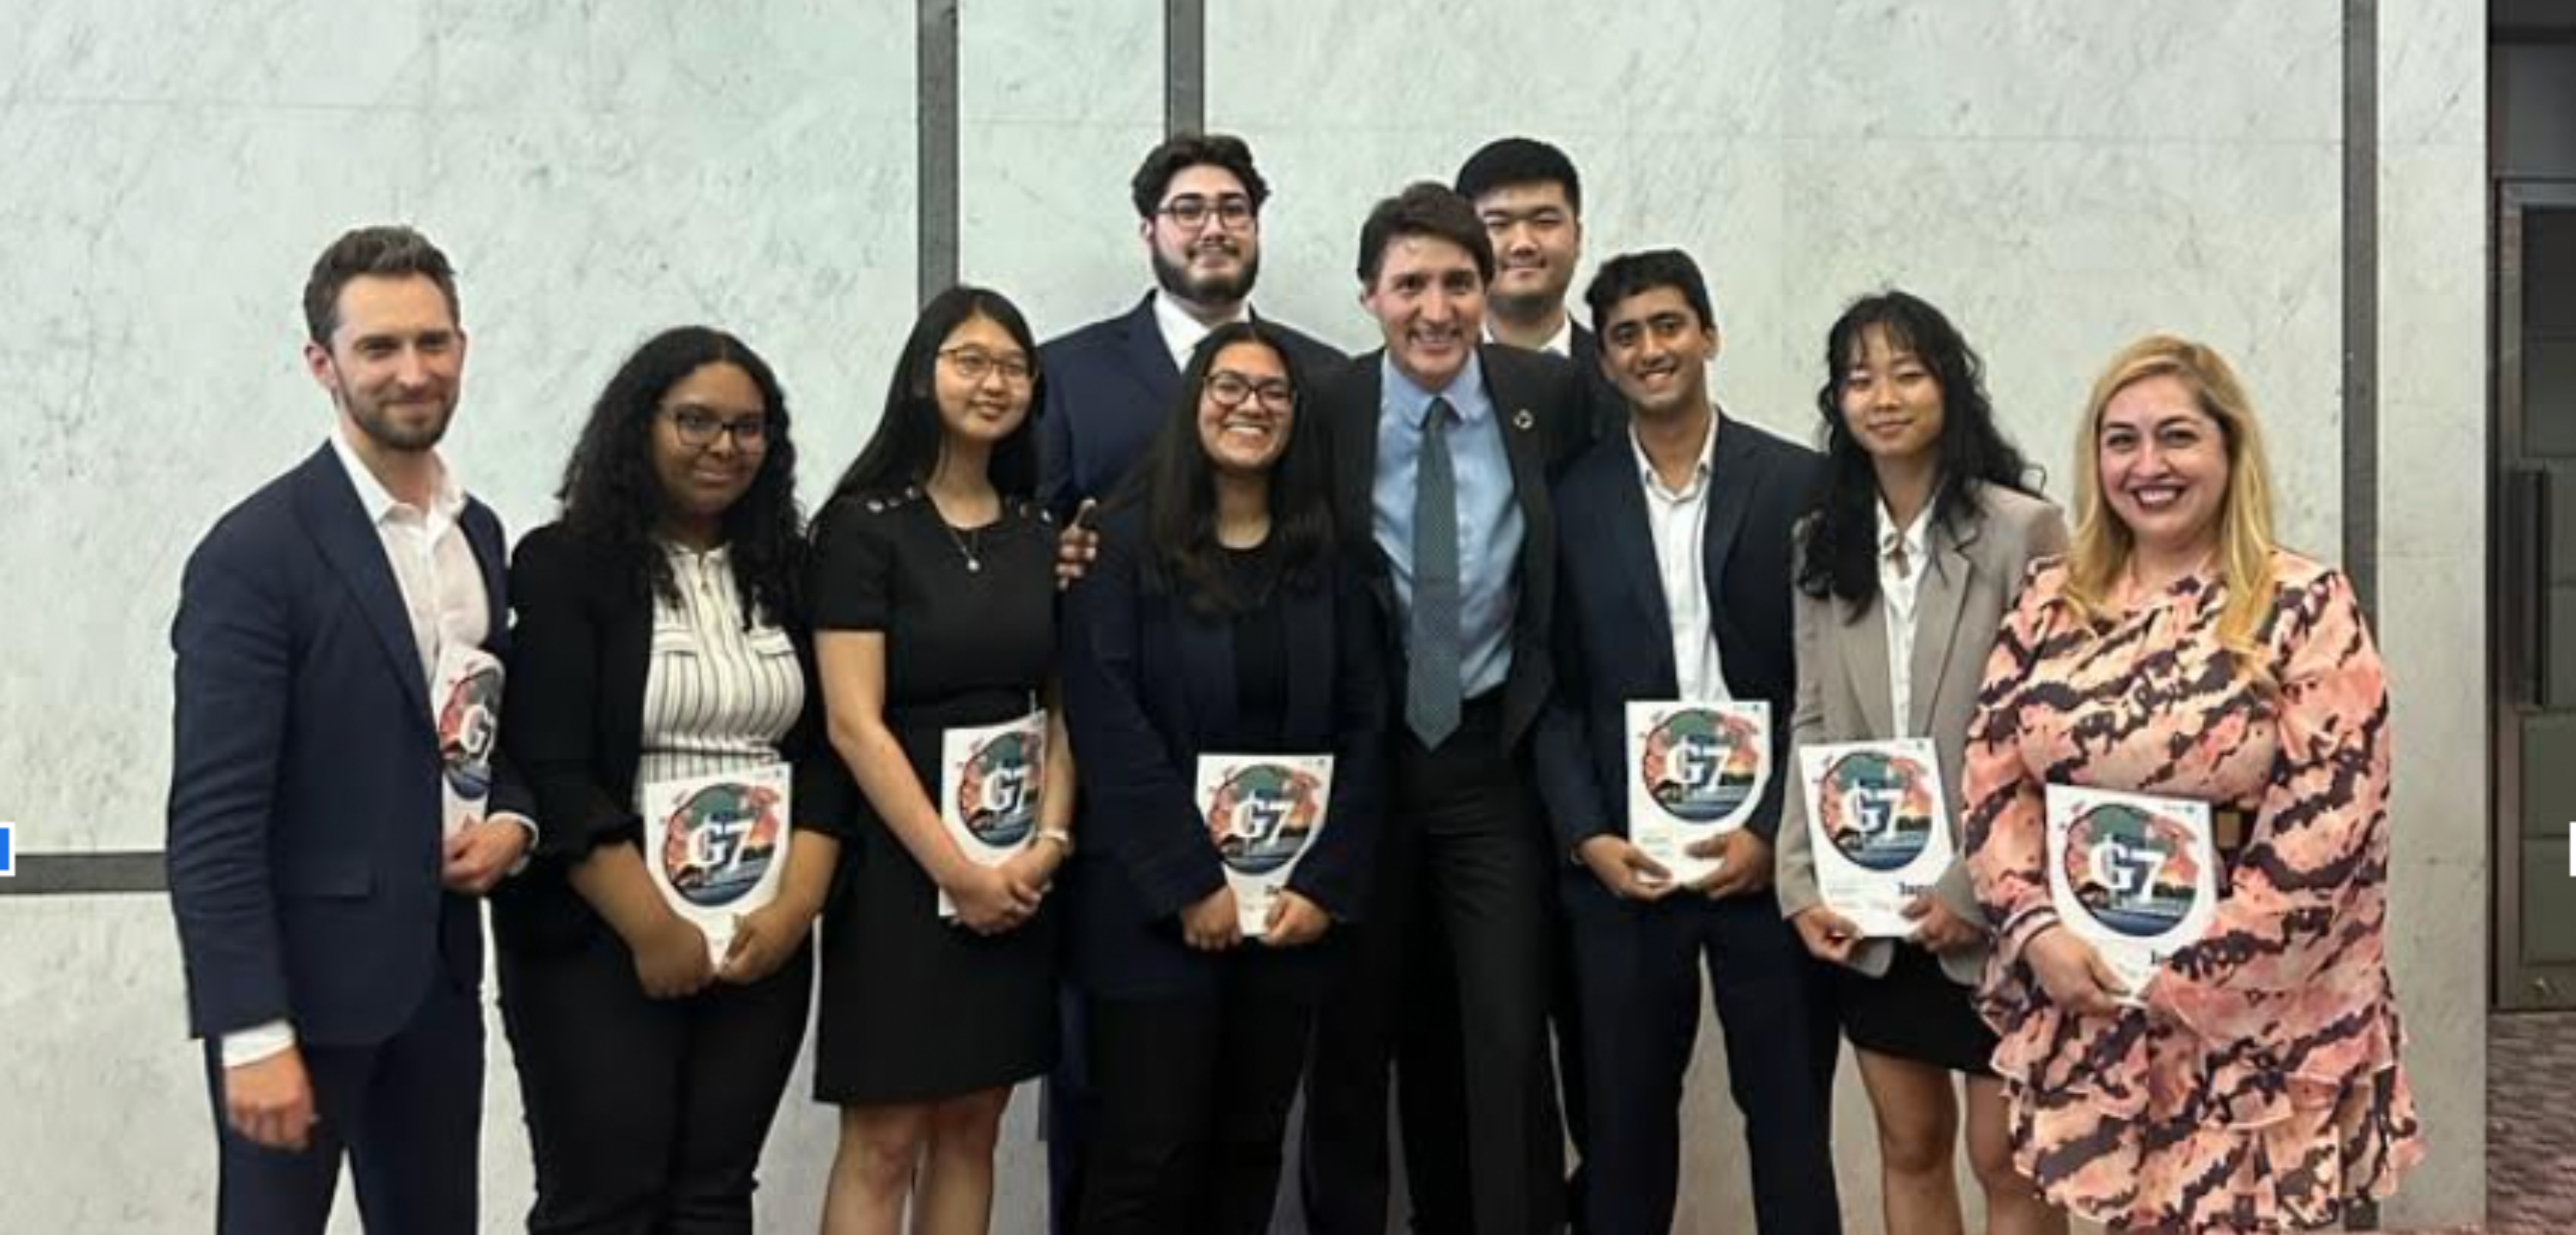 Canada Prime Minister, Justin Trudeau, stands in the middle of a group of university students.